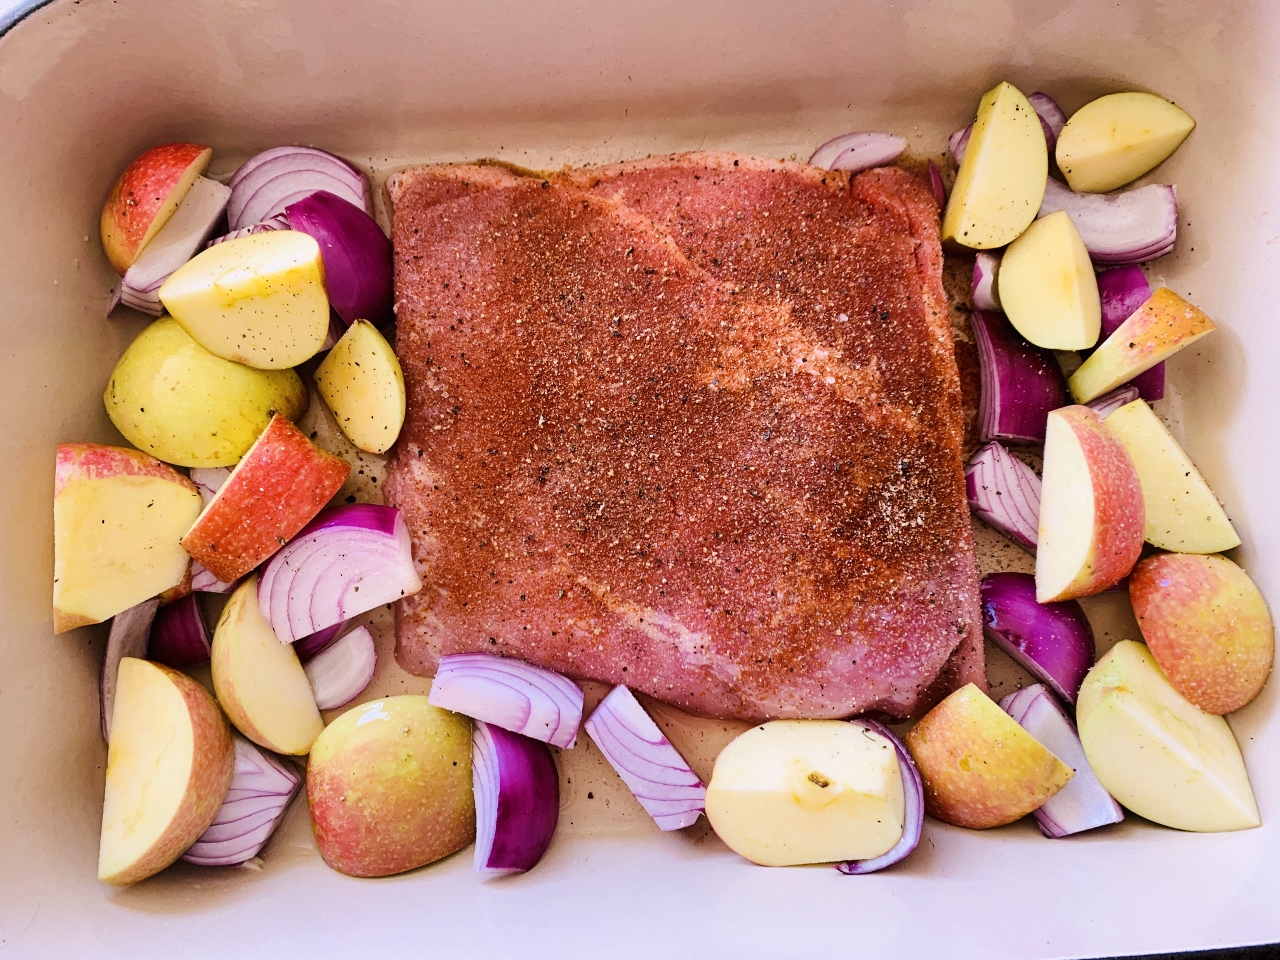 Slow-Roasted Pork Brisket with Onions and Apples – Recipe! Image 3